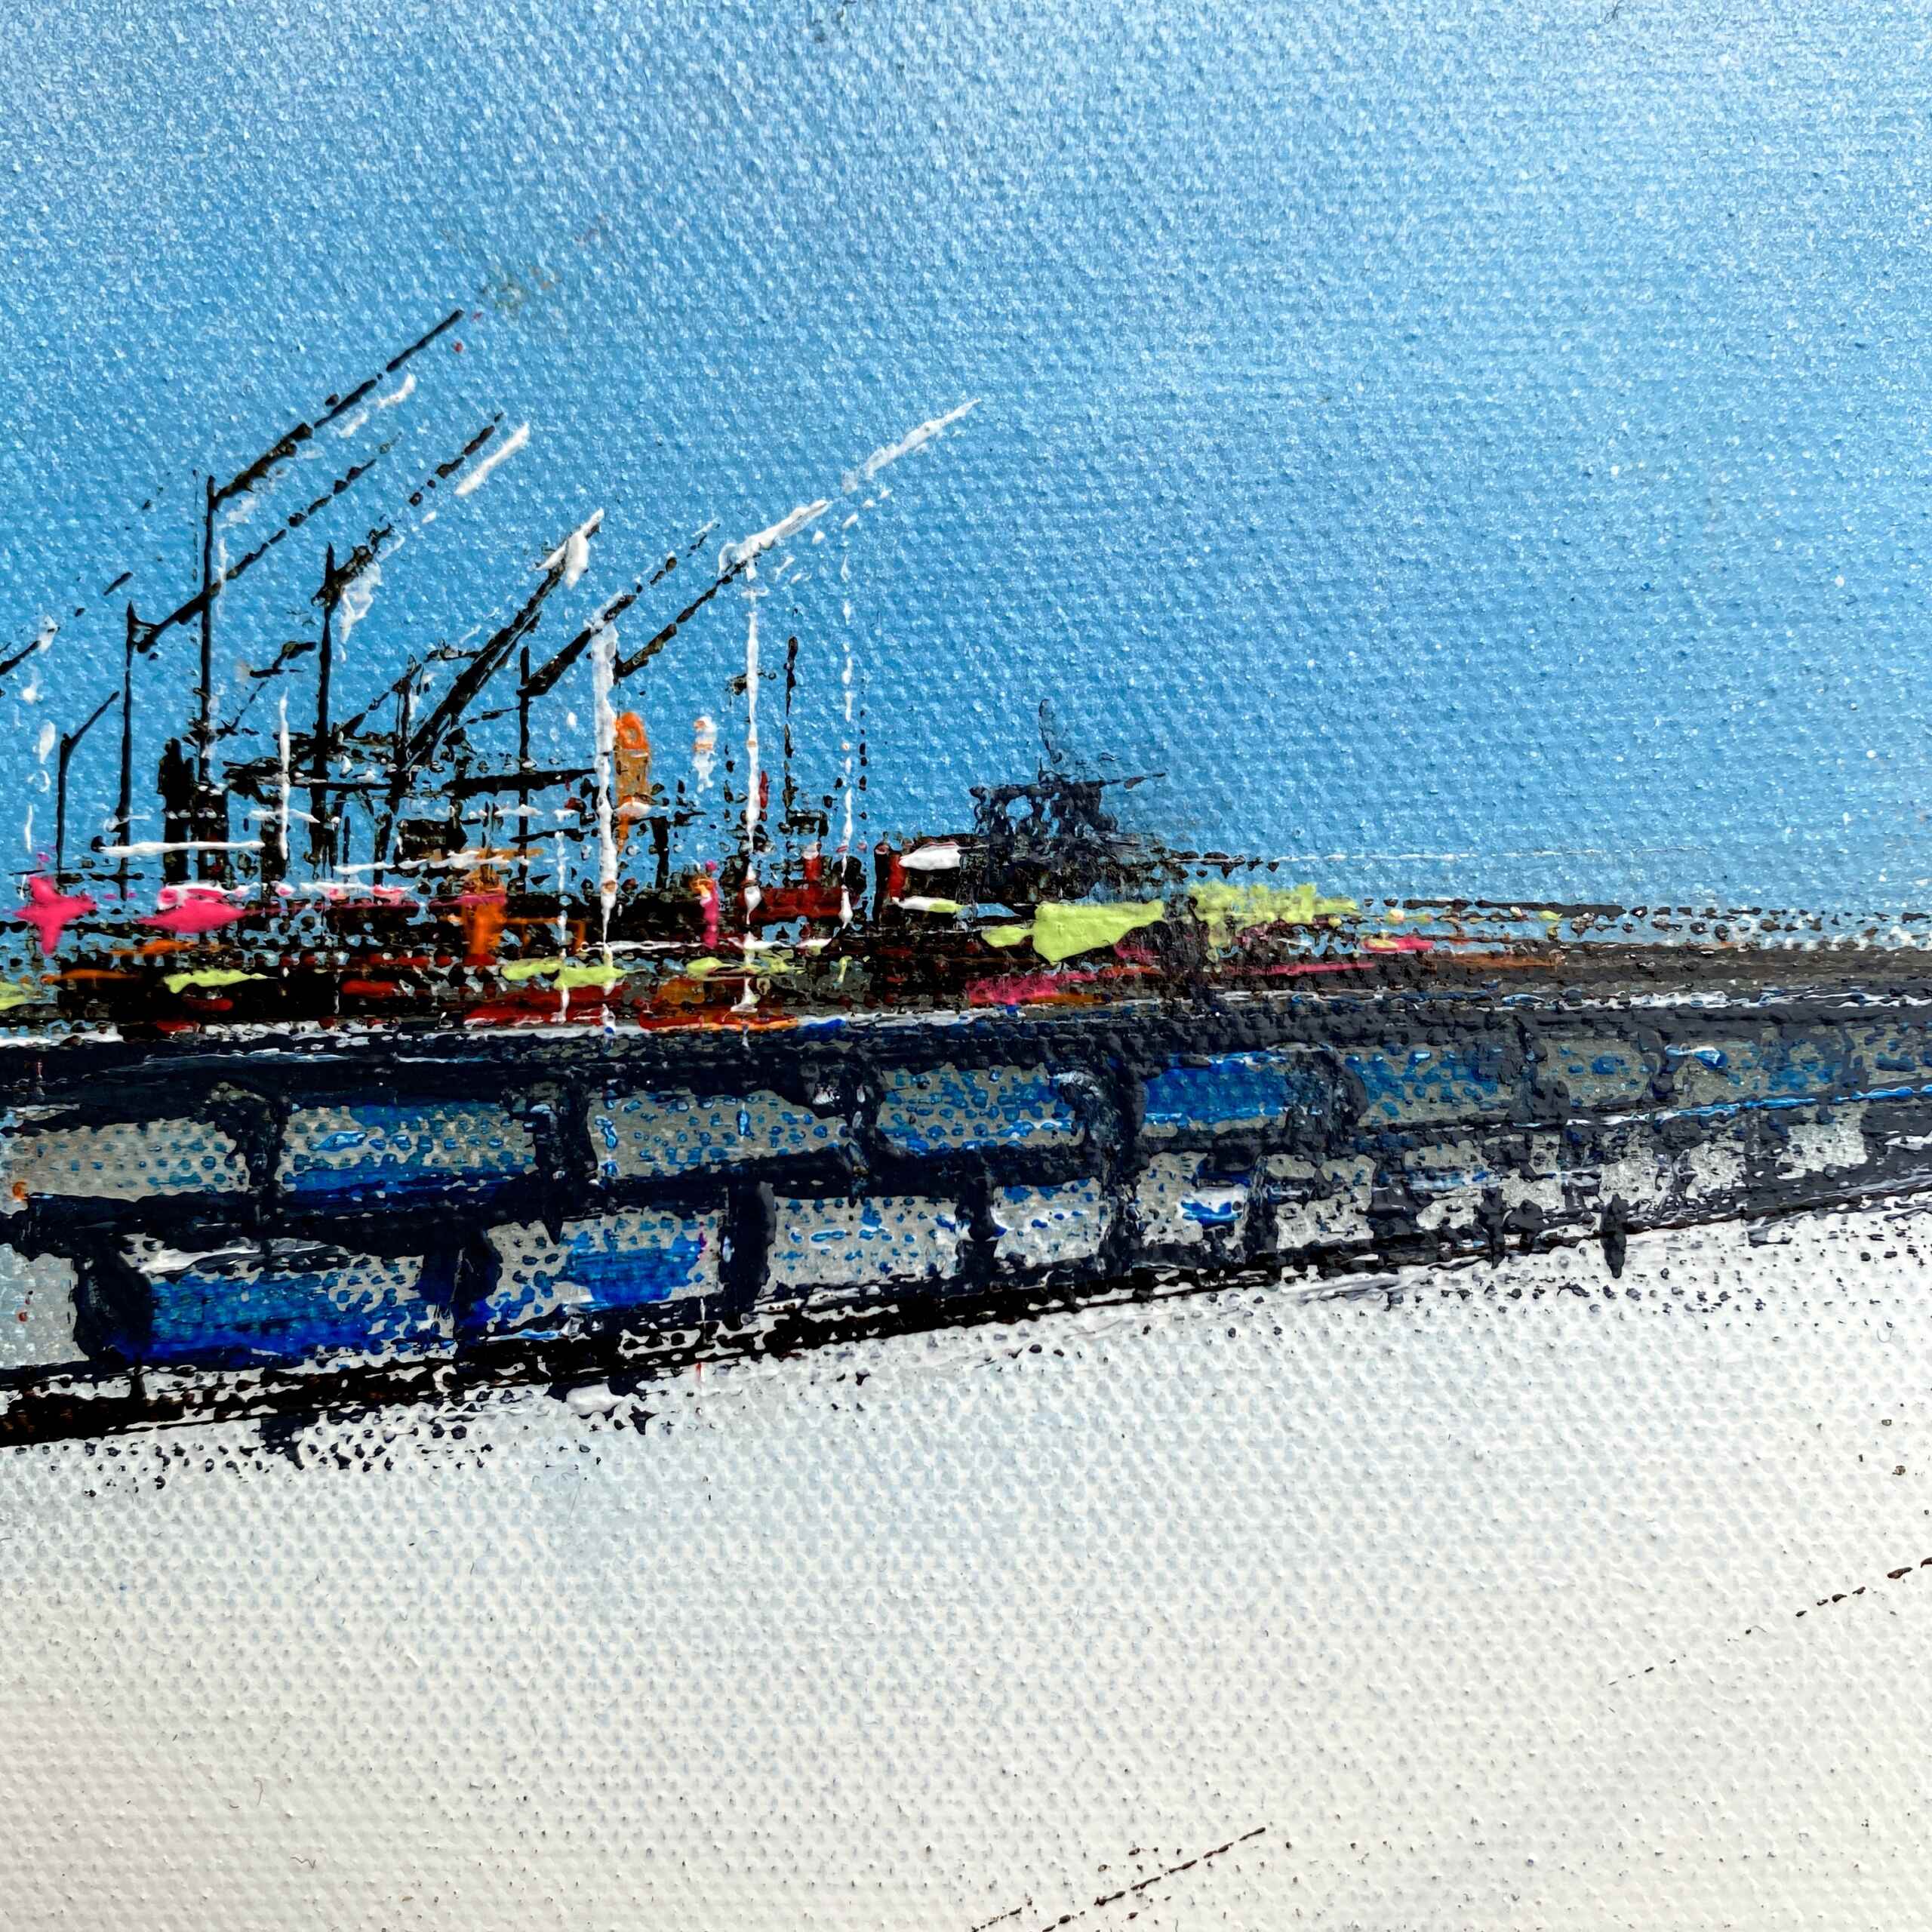 Detail of artwork "Dockland" by Nina Groth